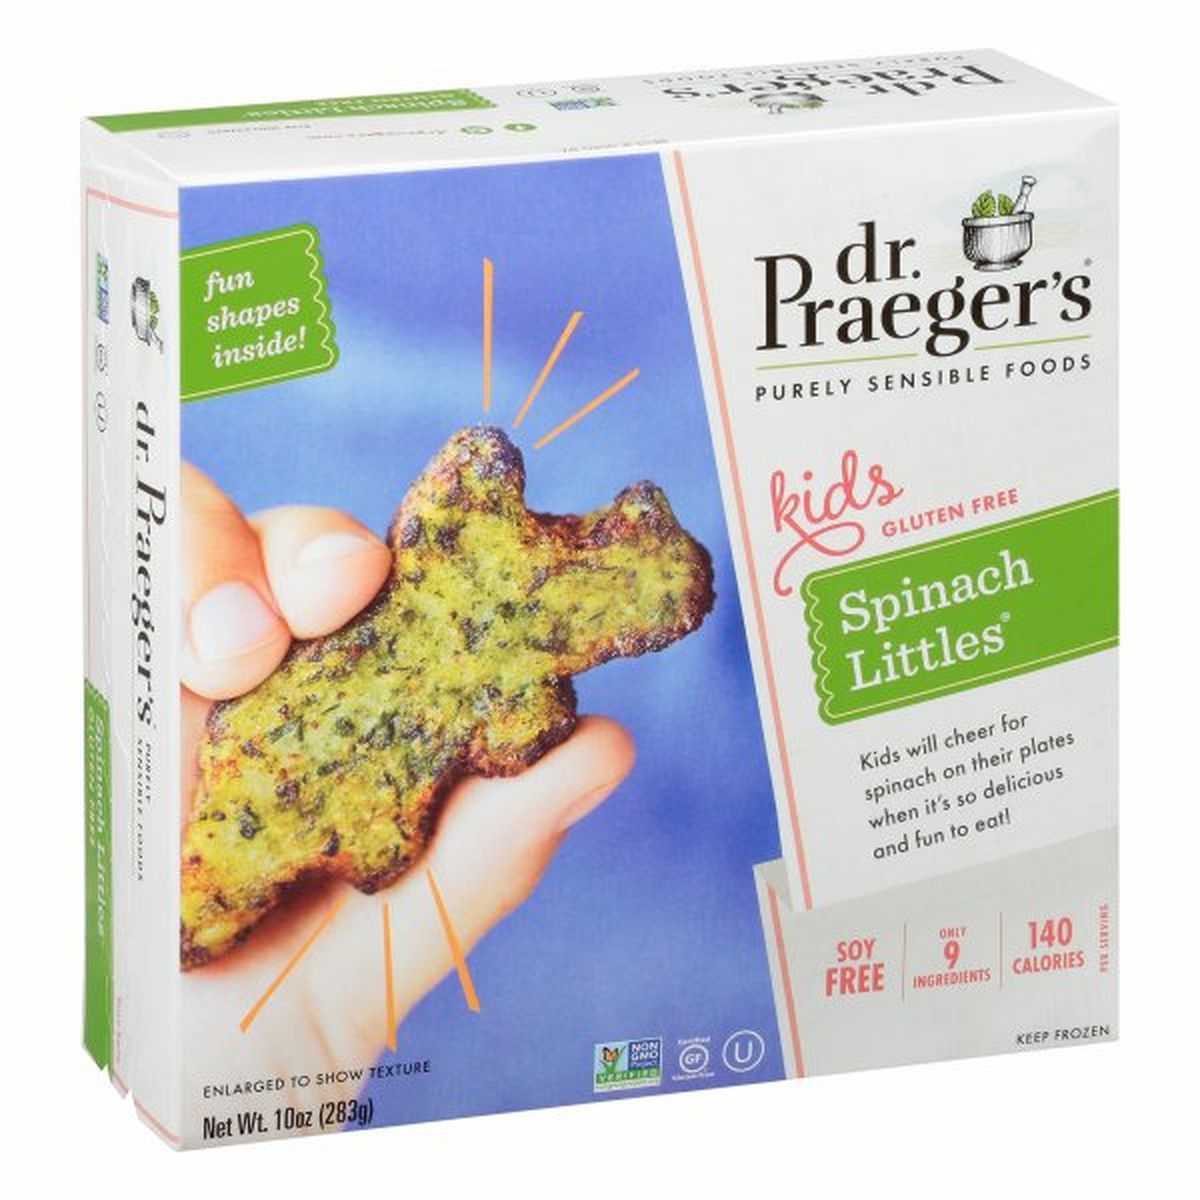 Calories in Dr. Praeger's Spinach Littles, Gluten Free